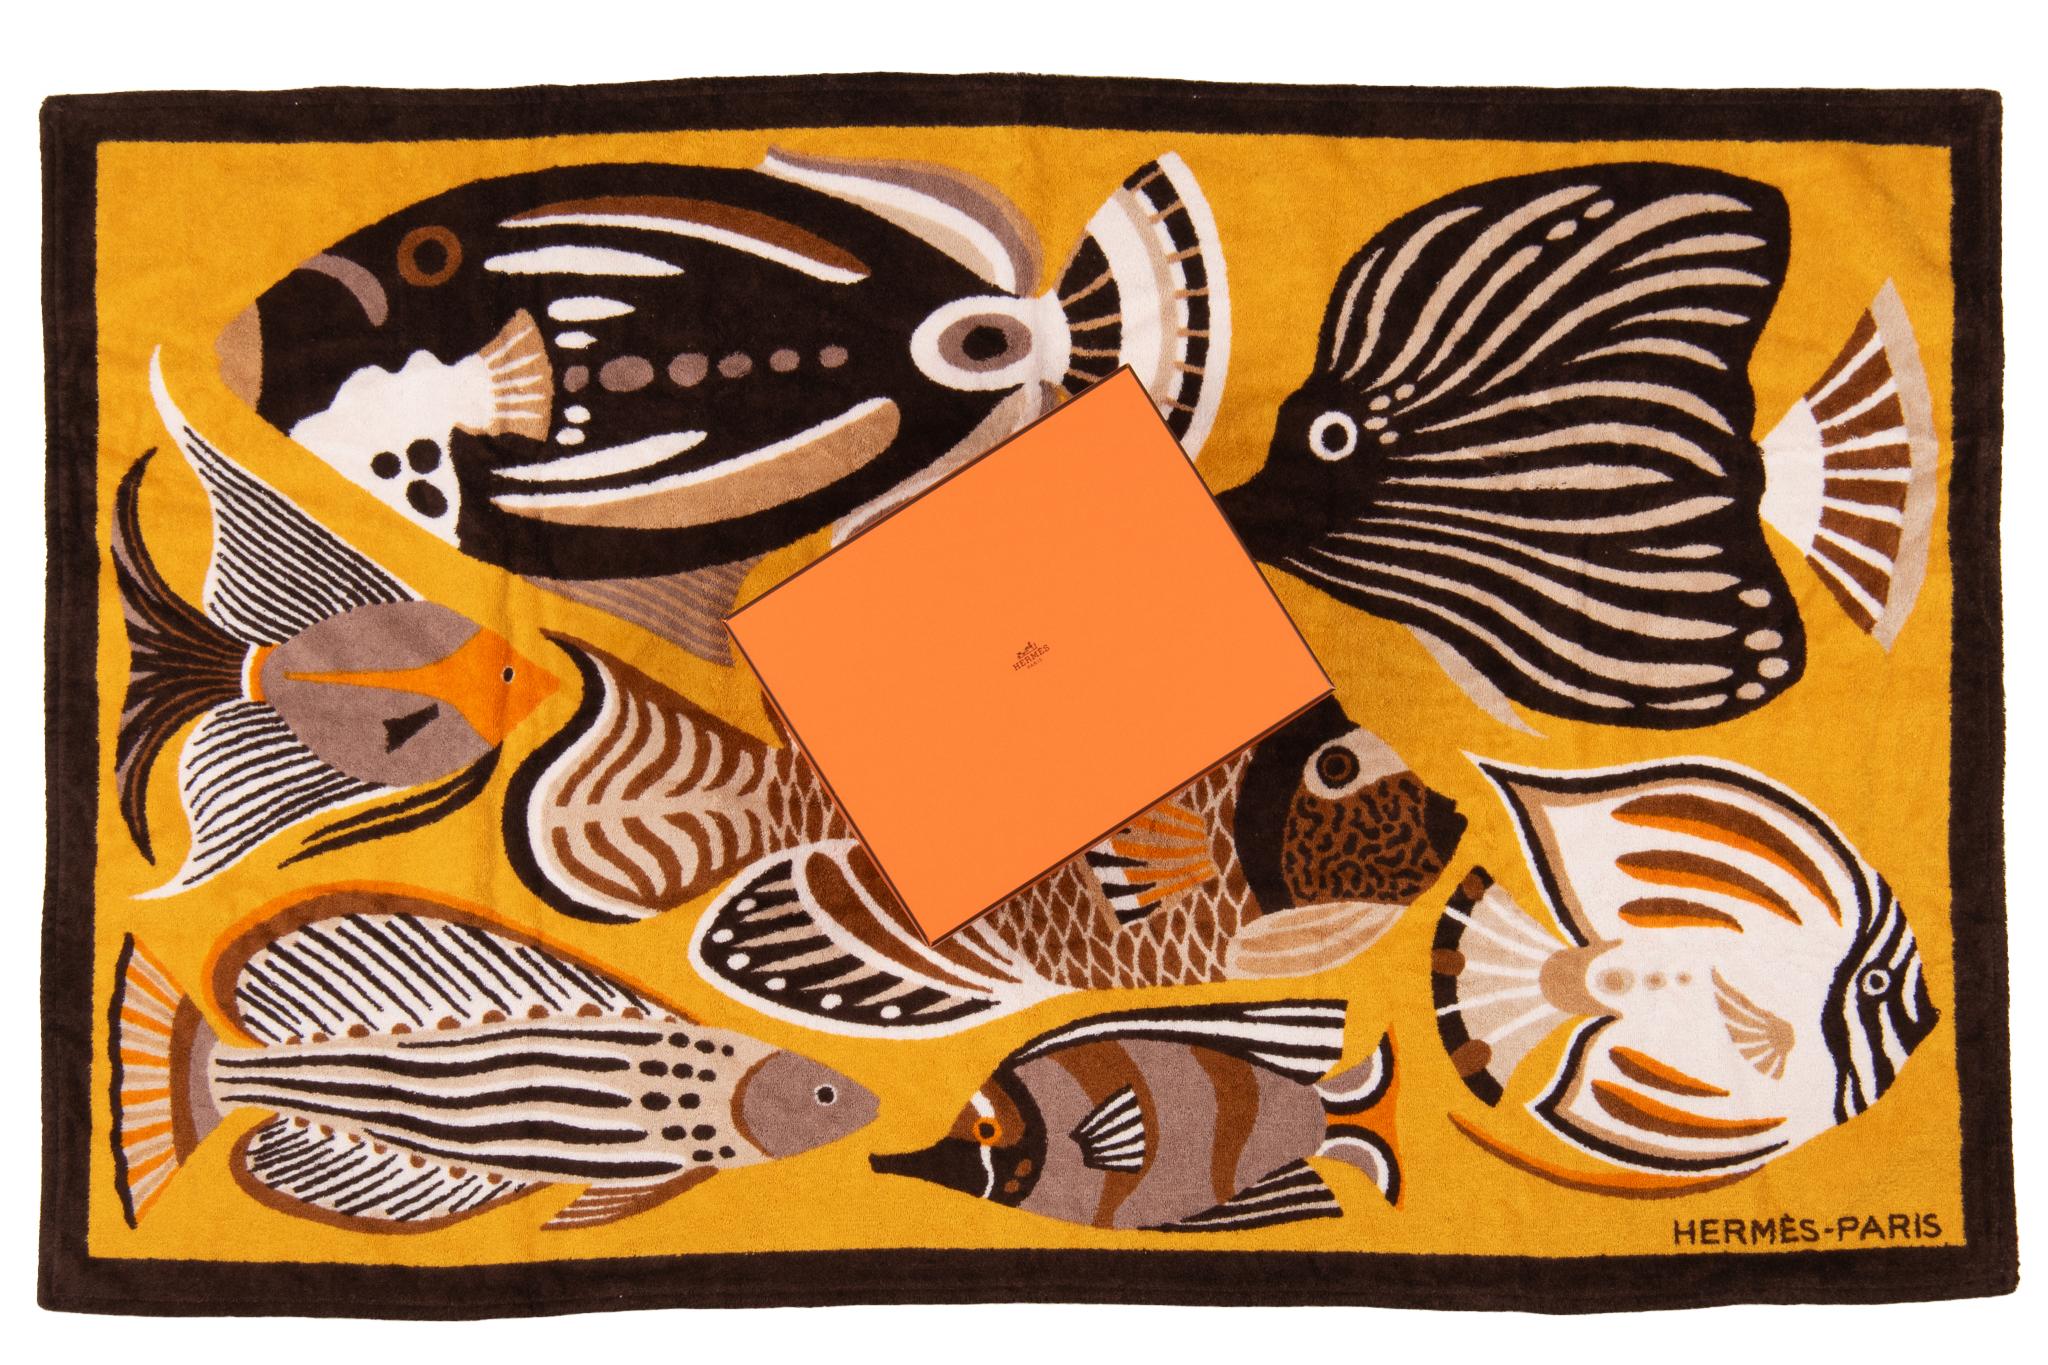 Hermès Fish Beach Towel. The pattern features several fish in different colors. The piece is new and comes in the original box.